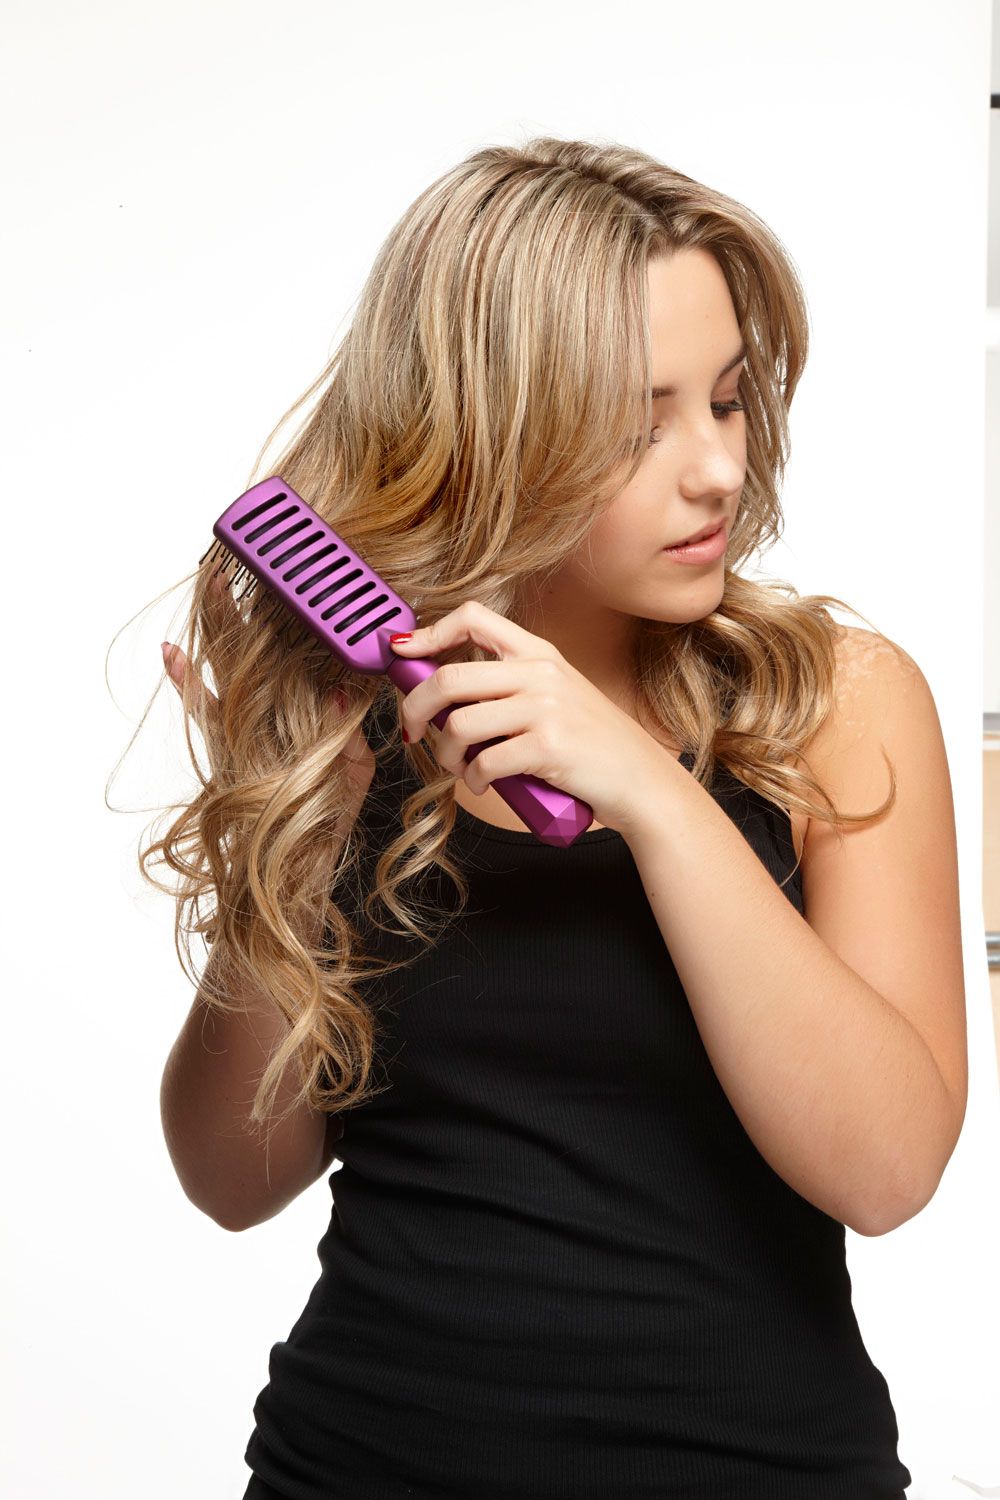 Mistakes You Make Brushing Your Hair - How To Brush Your Hair